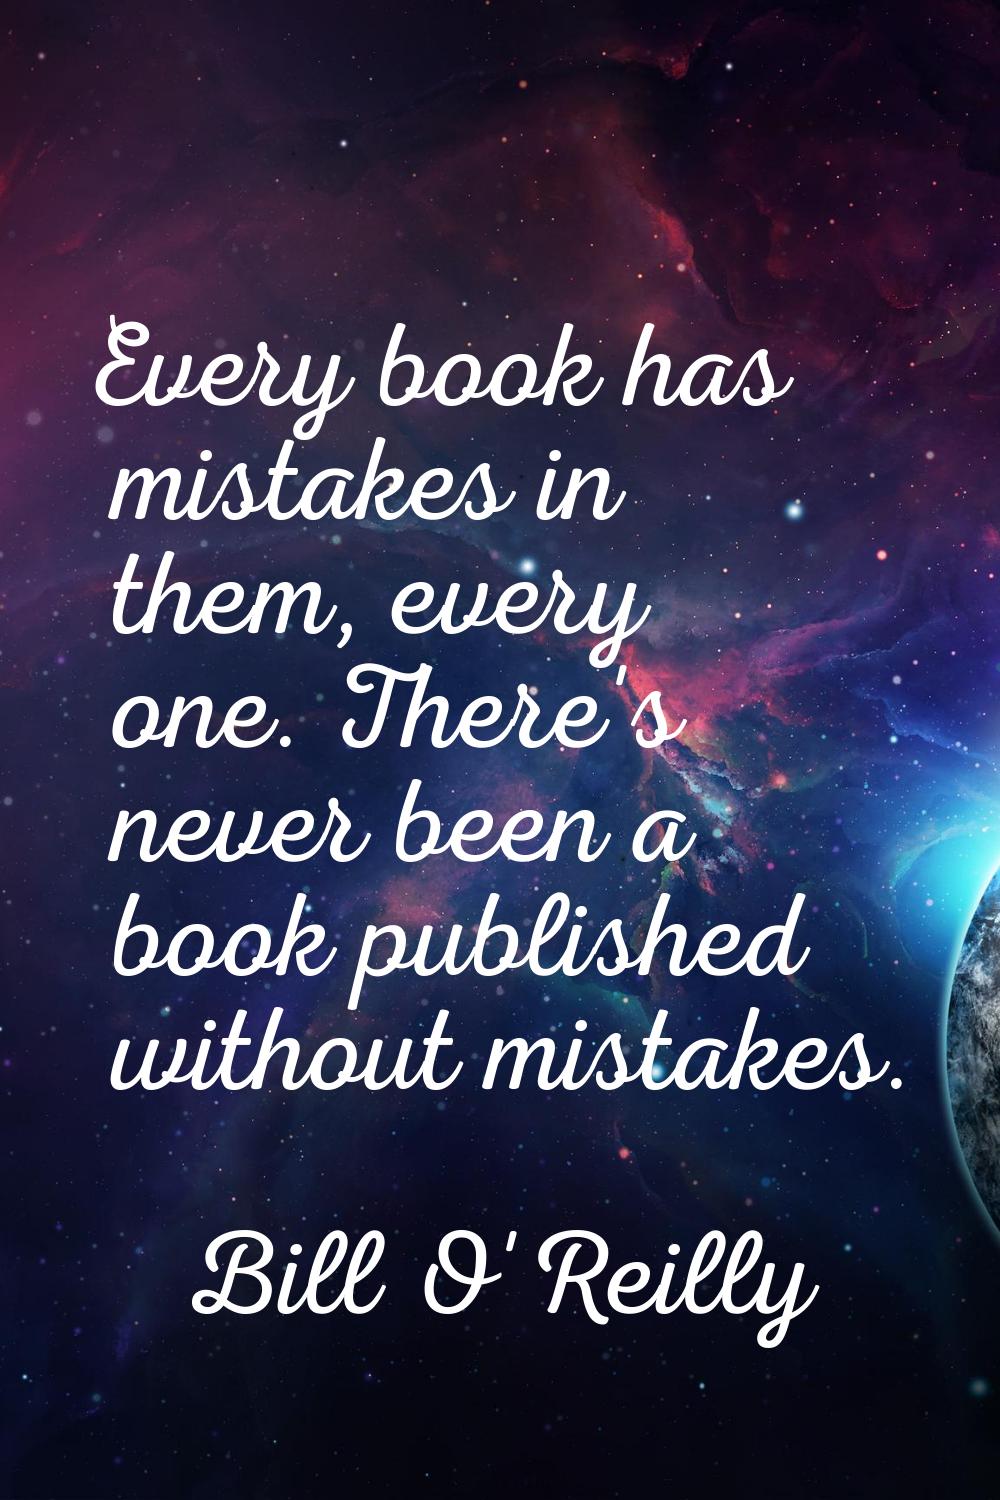 Every book has mistakes in them, every one. There's never been a book published without mistakes.